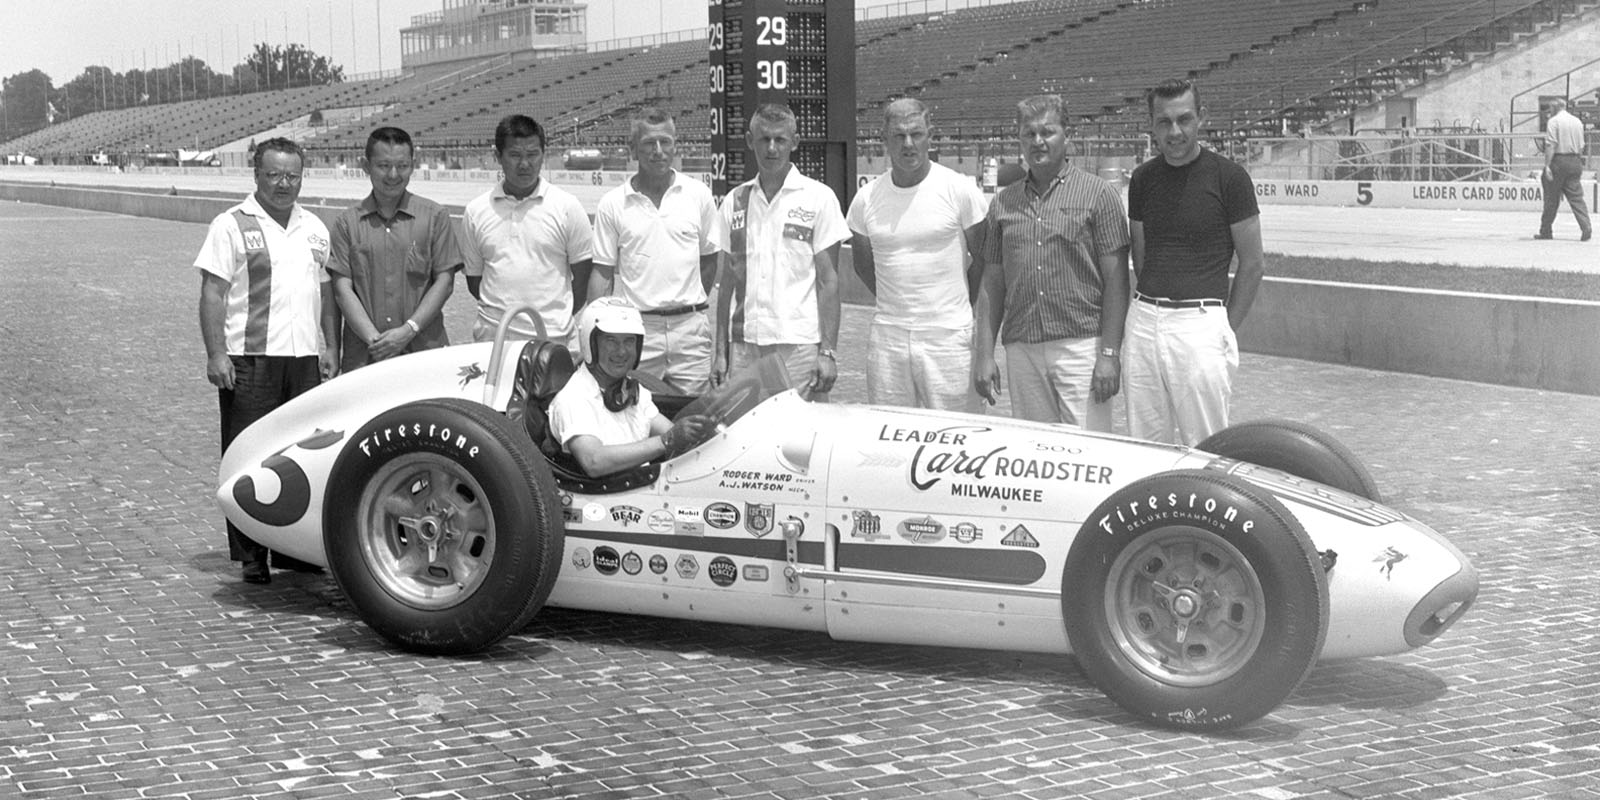 A J WATSON AUTOGRAPHED INDY 500 8 X 10  PHOTO DECEASED CHIEF MECHANIC ROADSTER 